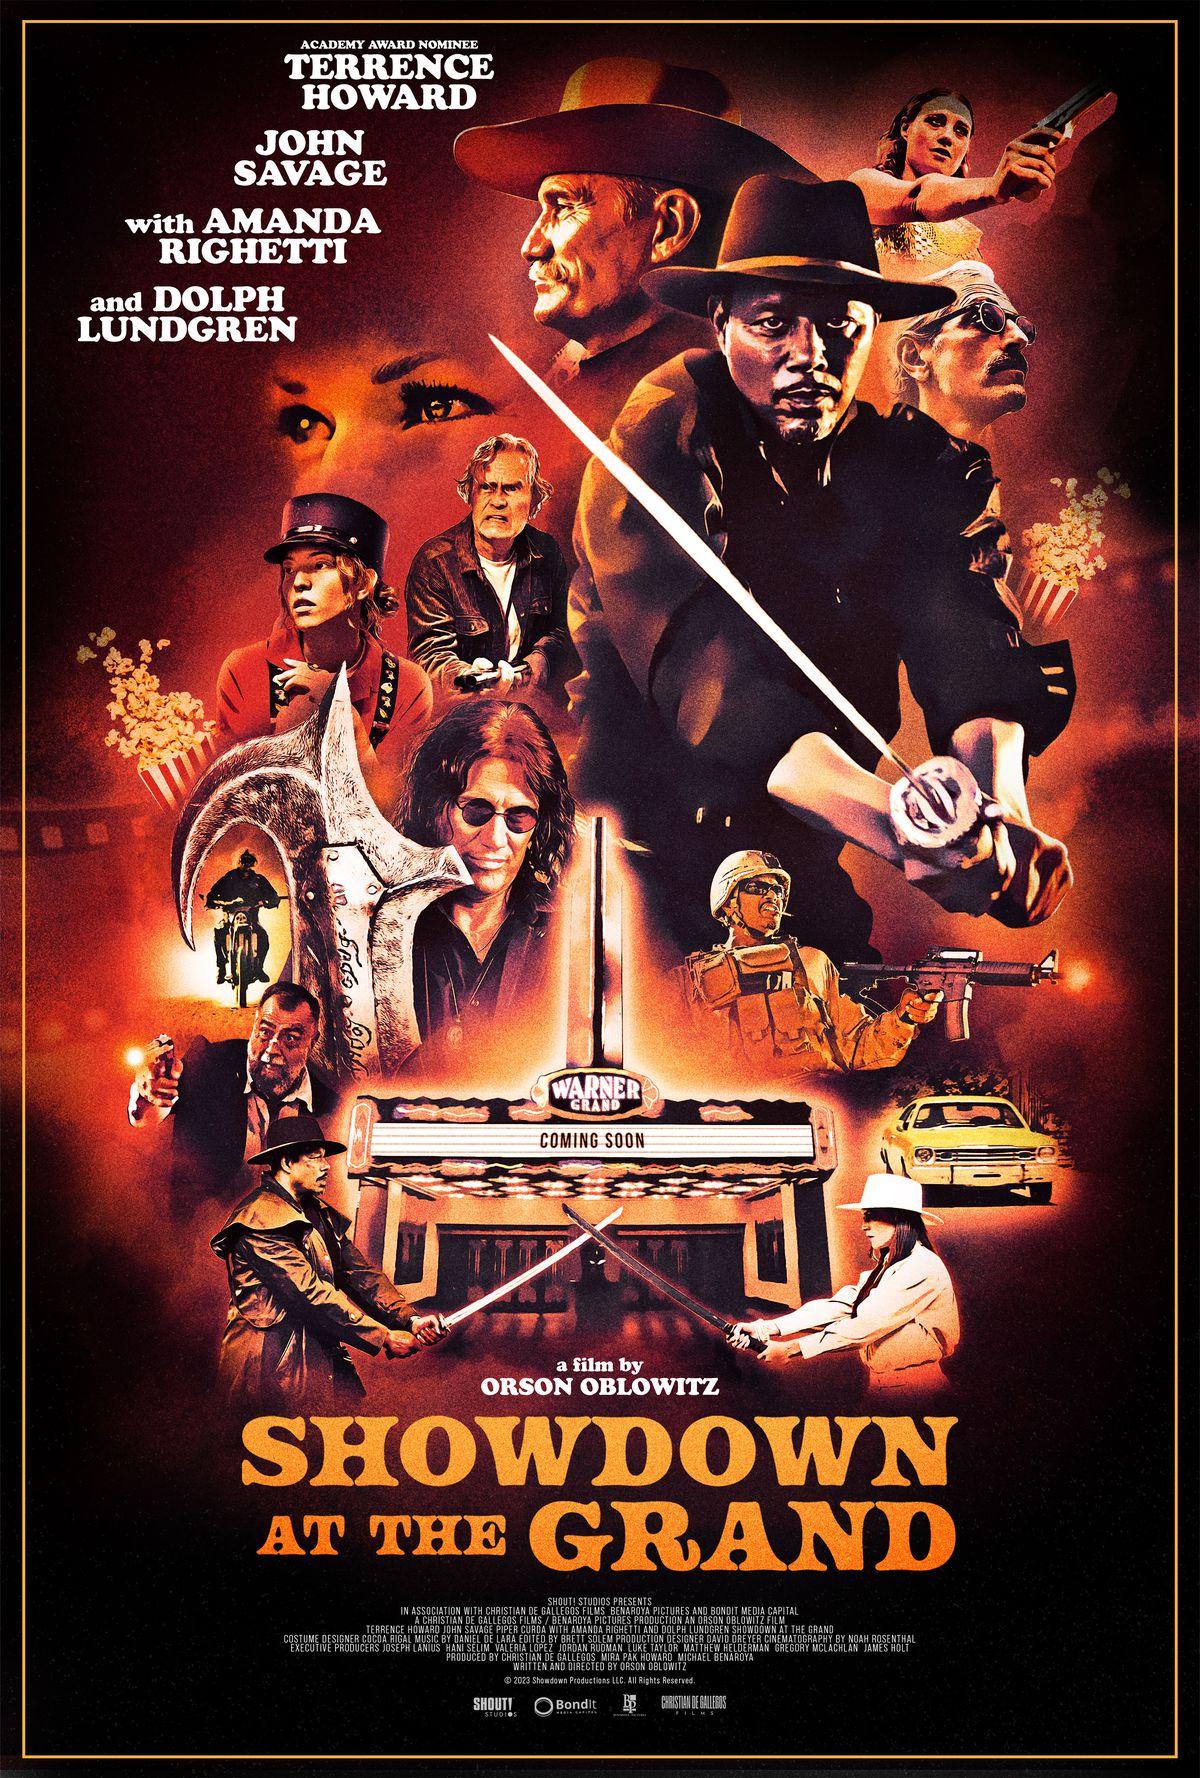 Poster for Showdown at the Grand, an old school style of movie poster. There’s a movie marquee at the front, two people sword fighting in front of it, and a lot of faces engaged in various forms of action.